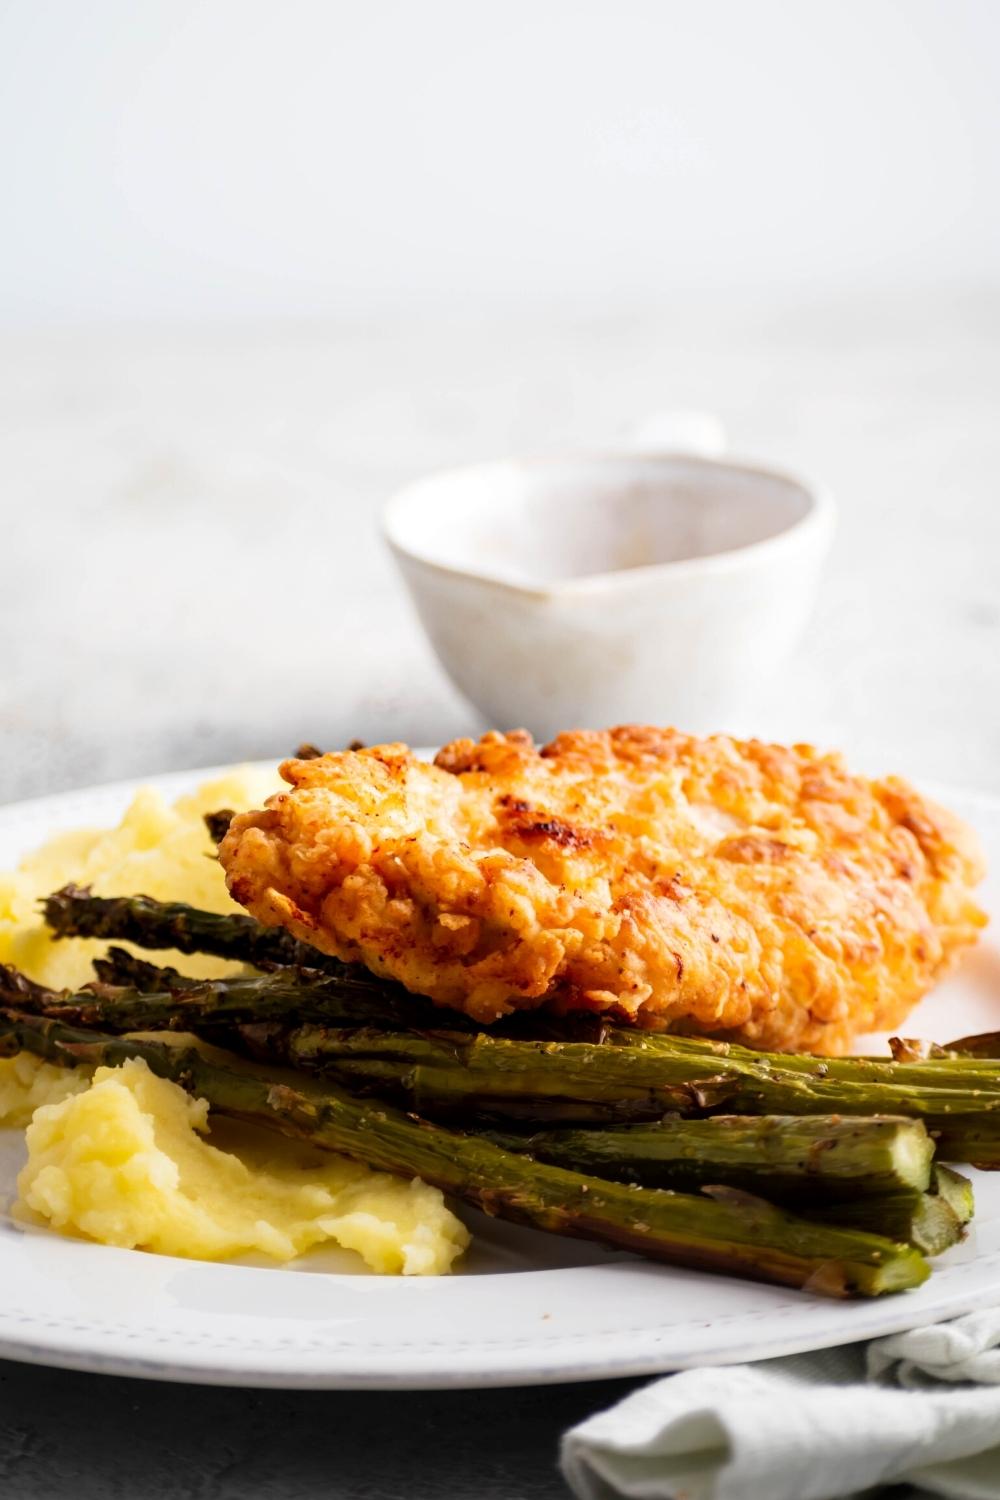 A piece of truffle honey chicken, asparagus spears, and mashed potatoes on a white plate.